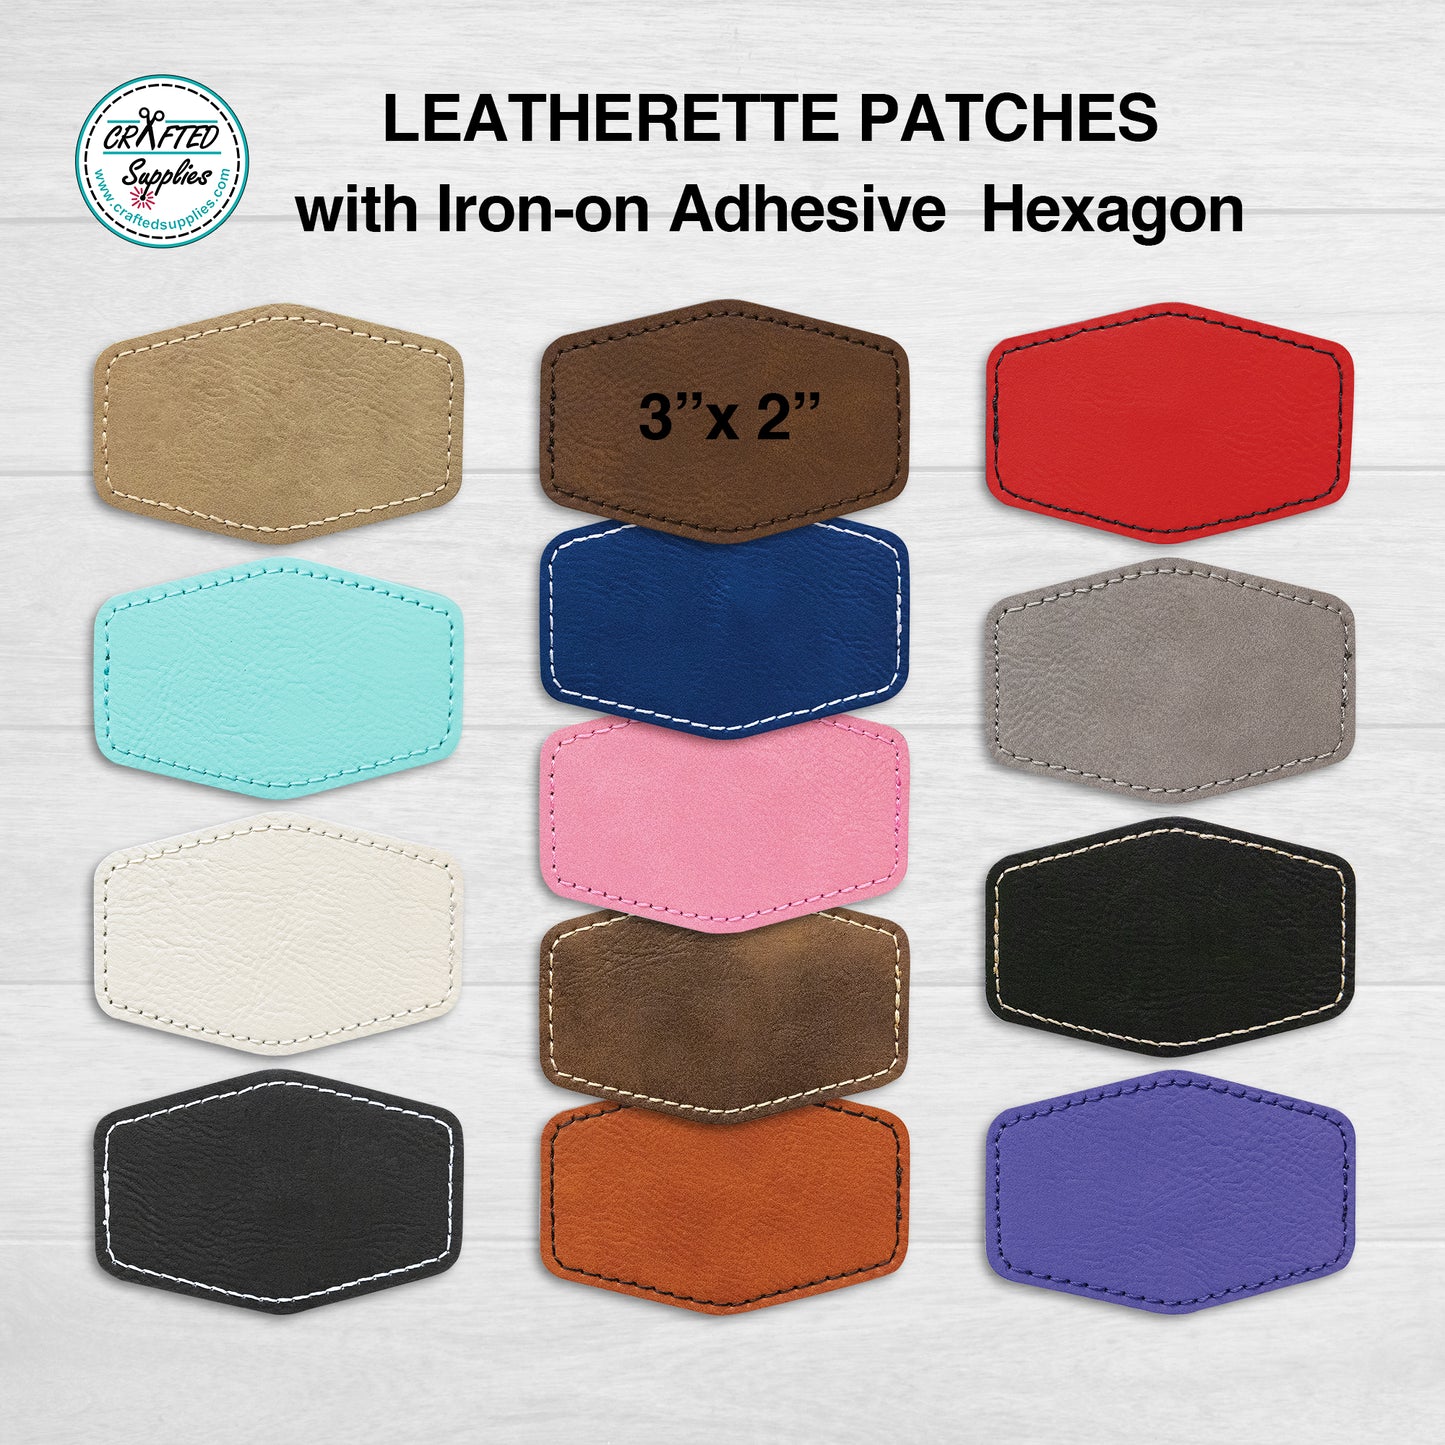 Leatherette Patch, Hexagon 3 in x 2 in